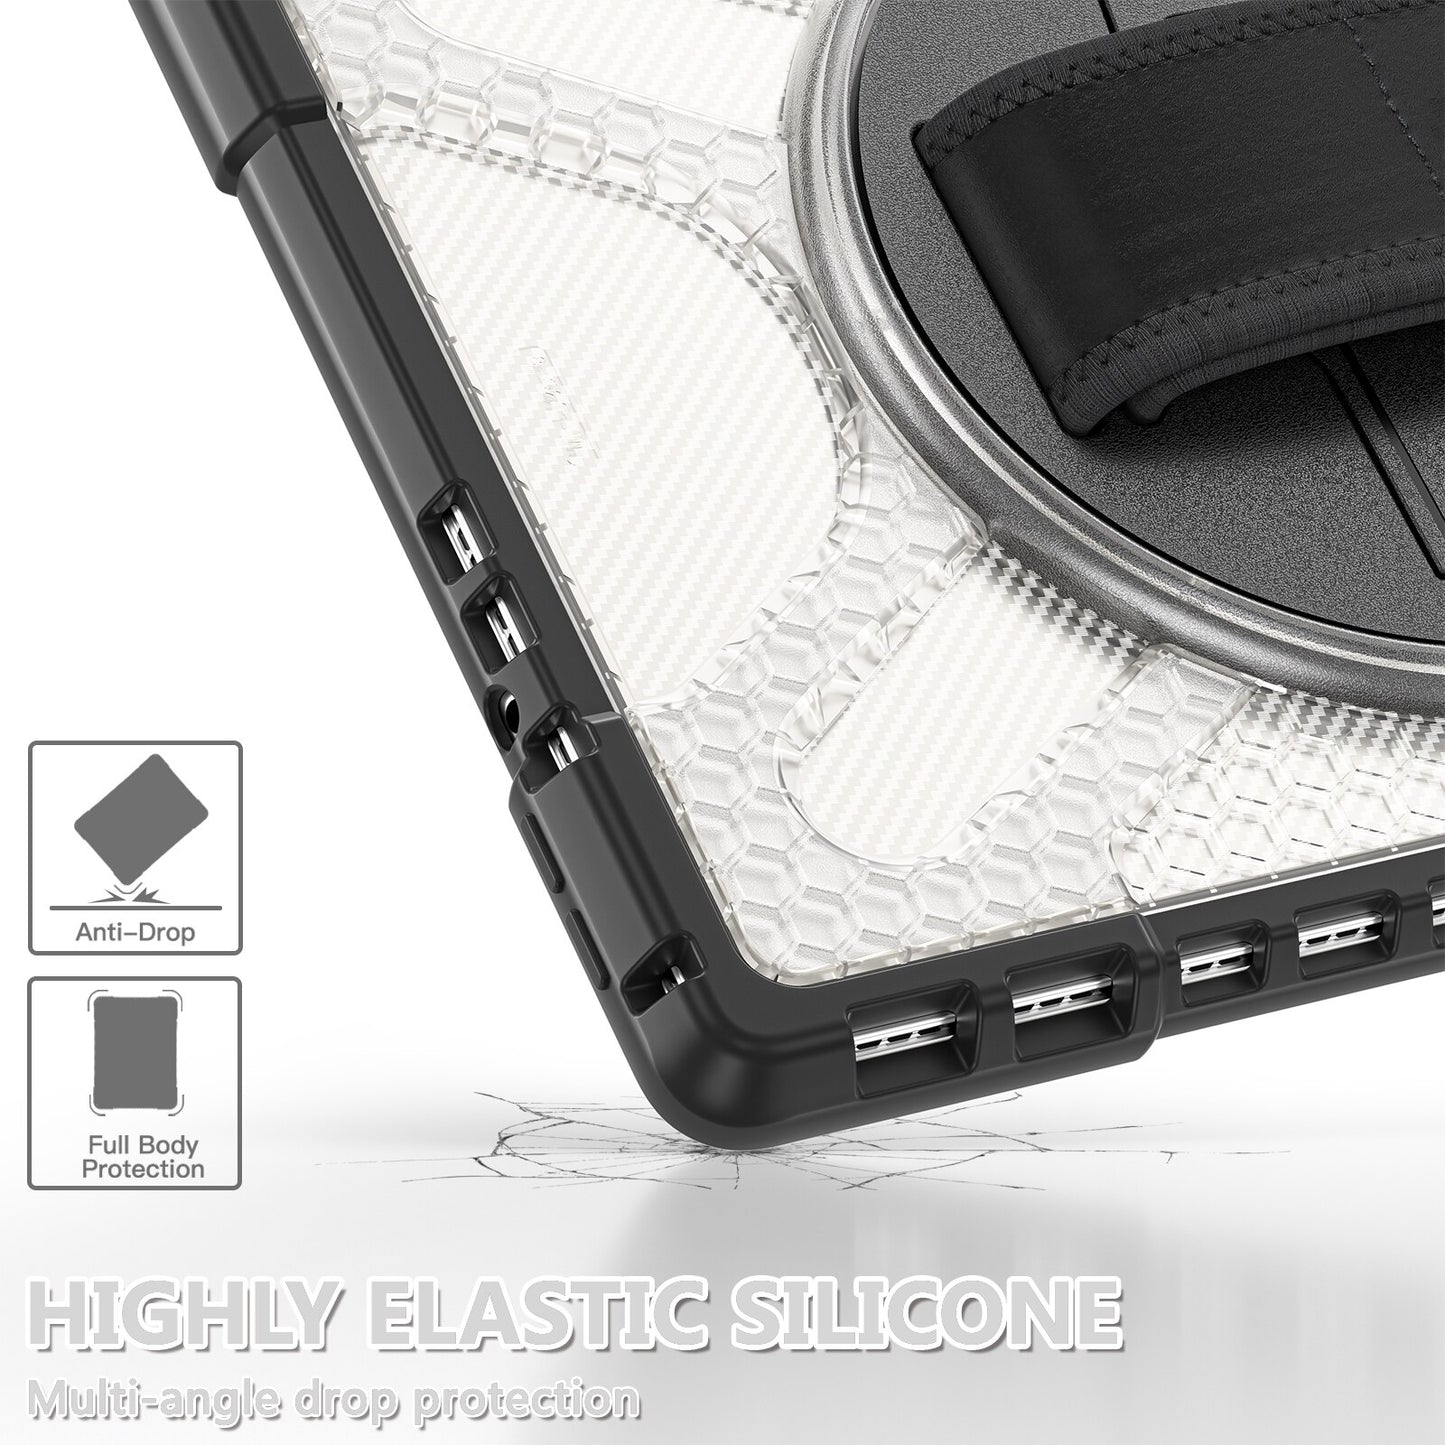 Military Grade 360 Rotating Case for Microsoft Surface Pro 9/8/7/6/5/4 GO 1/2/3 Shockproof Silicone Cover